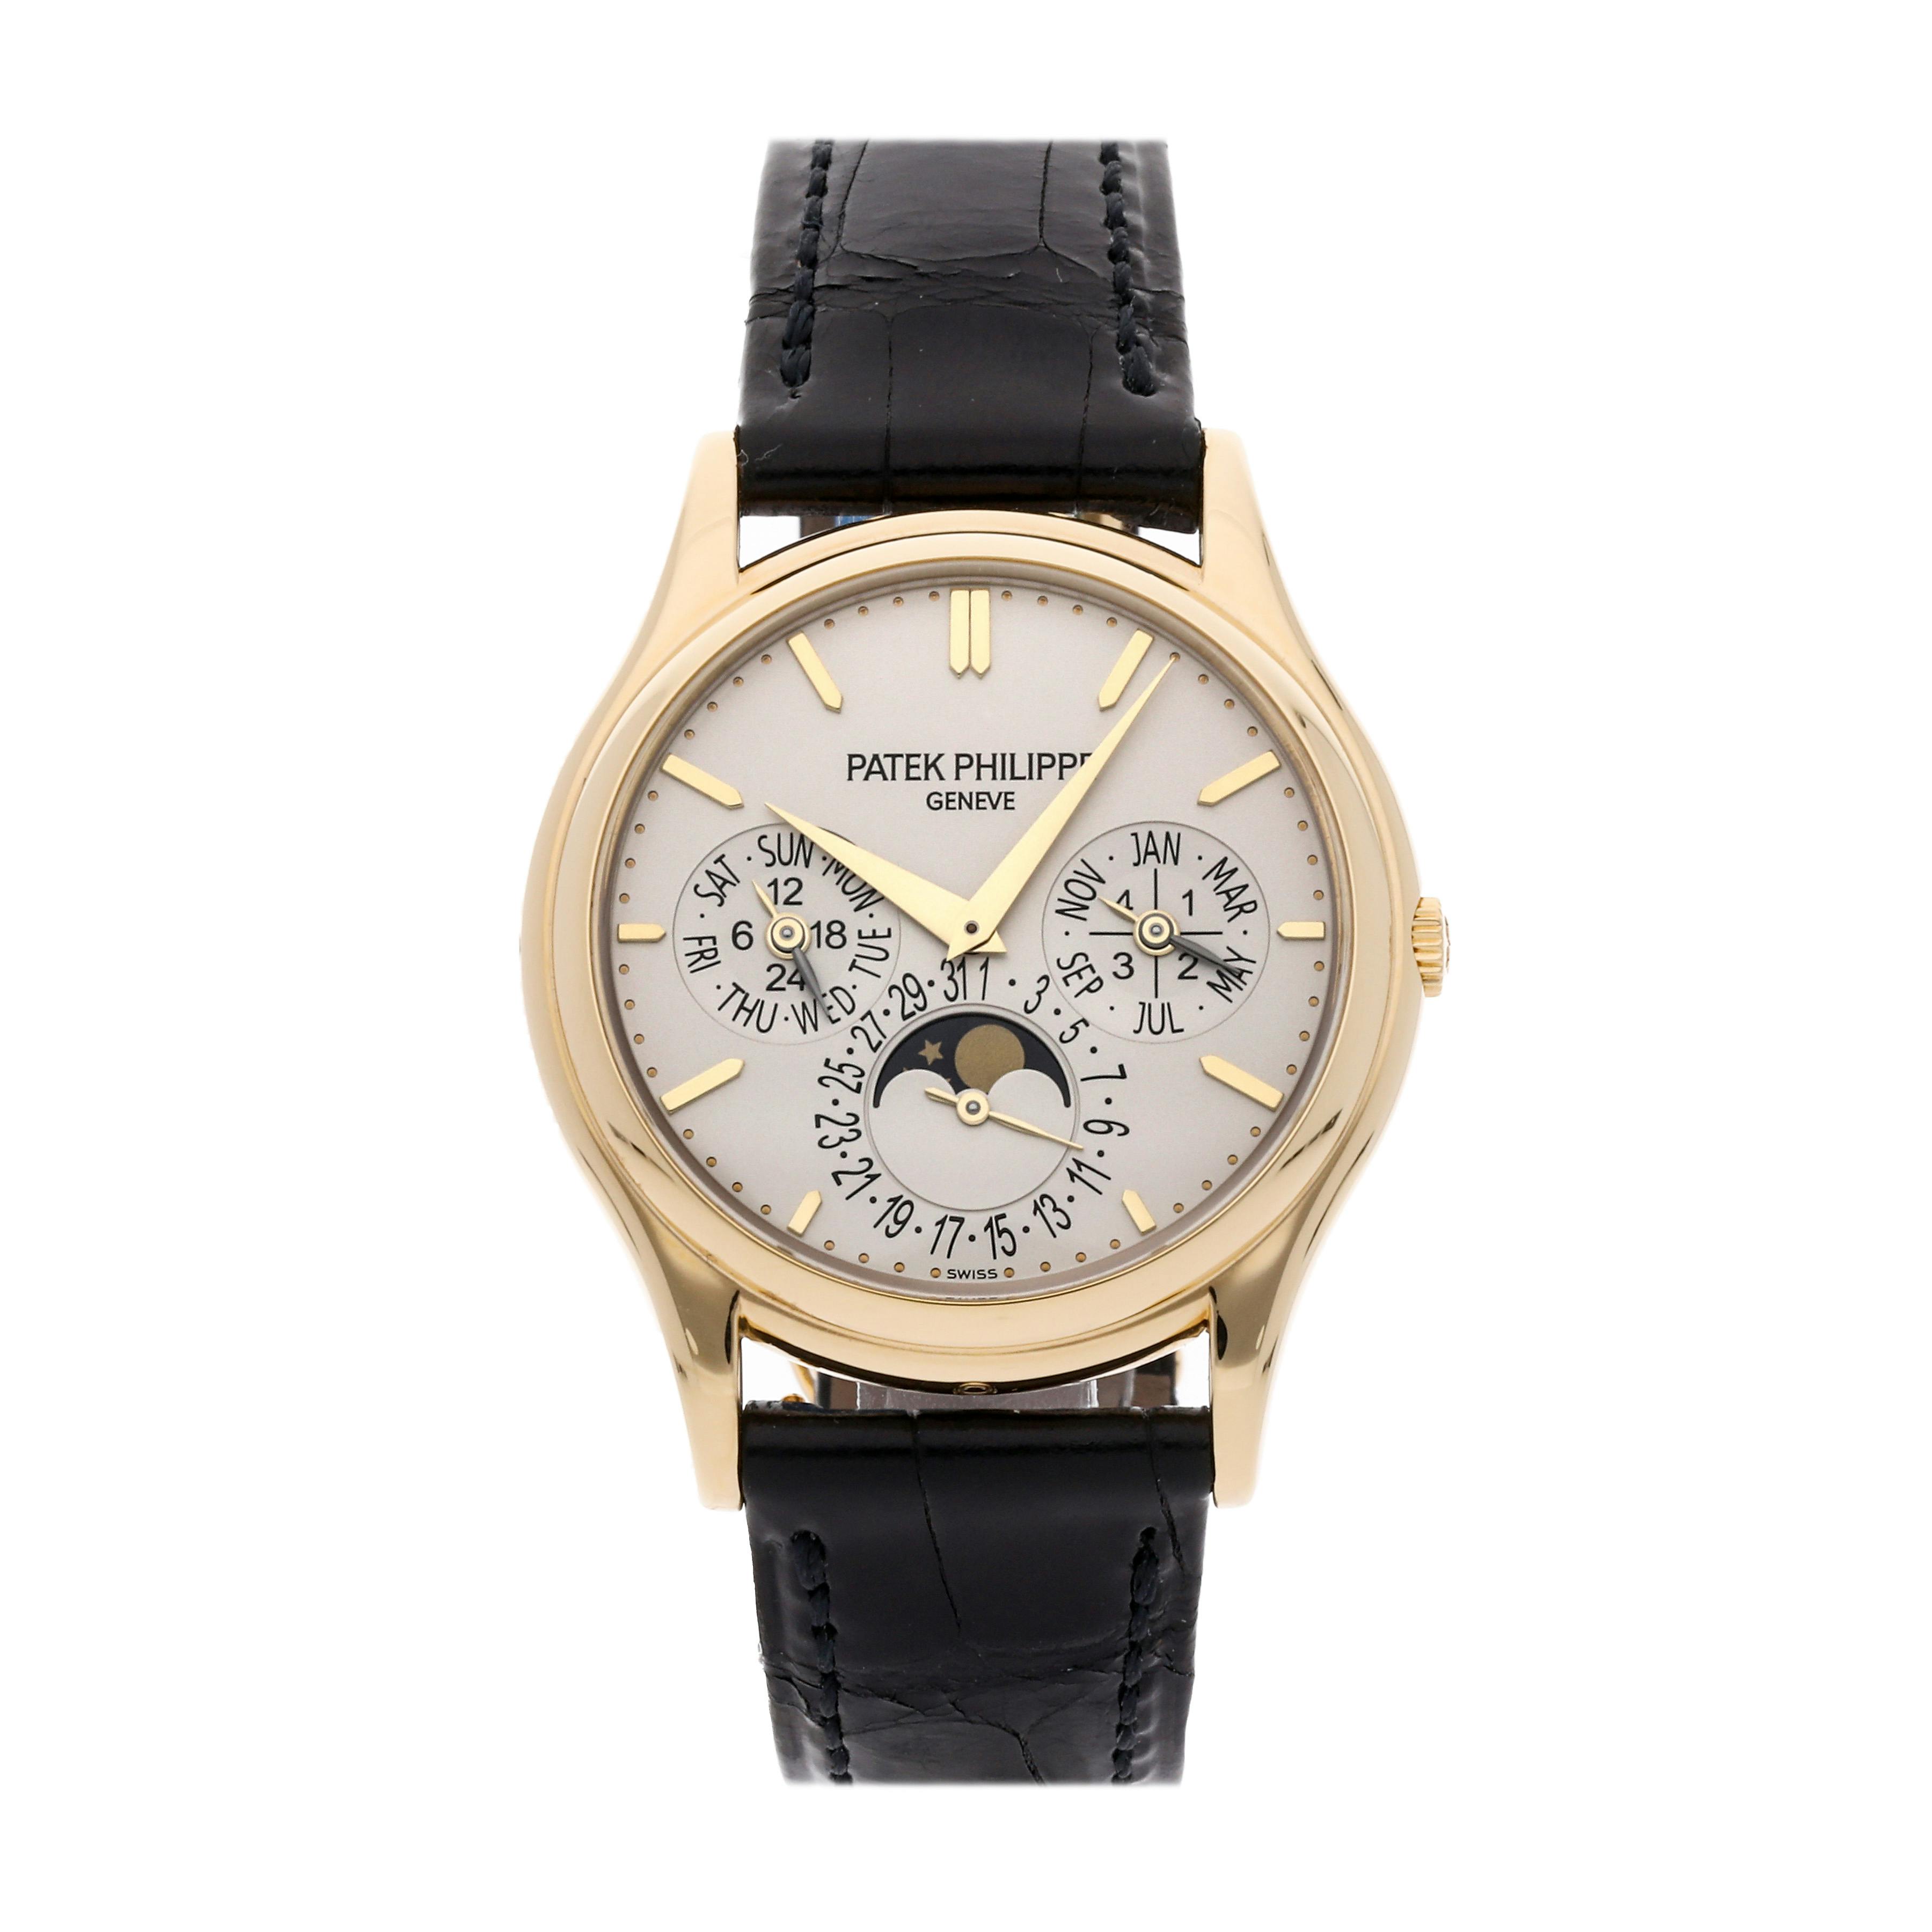 Patek Philippe - Vintage Mens Wristwatch – Every Watch Has a Story